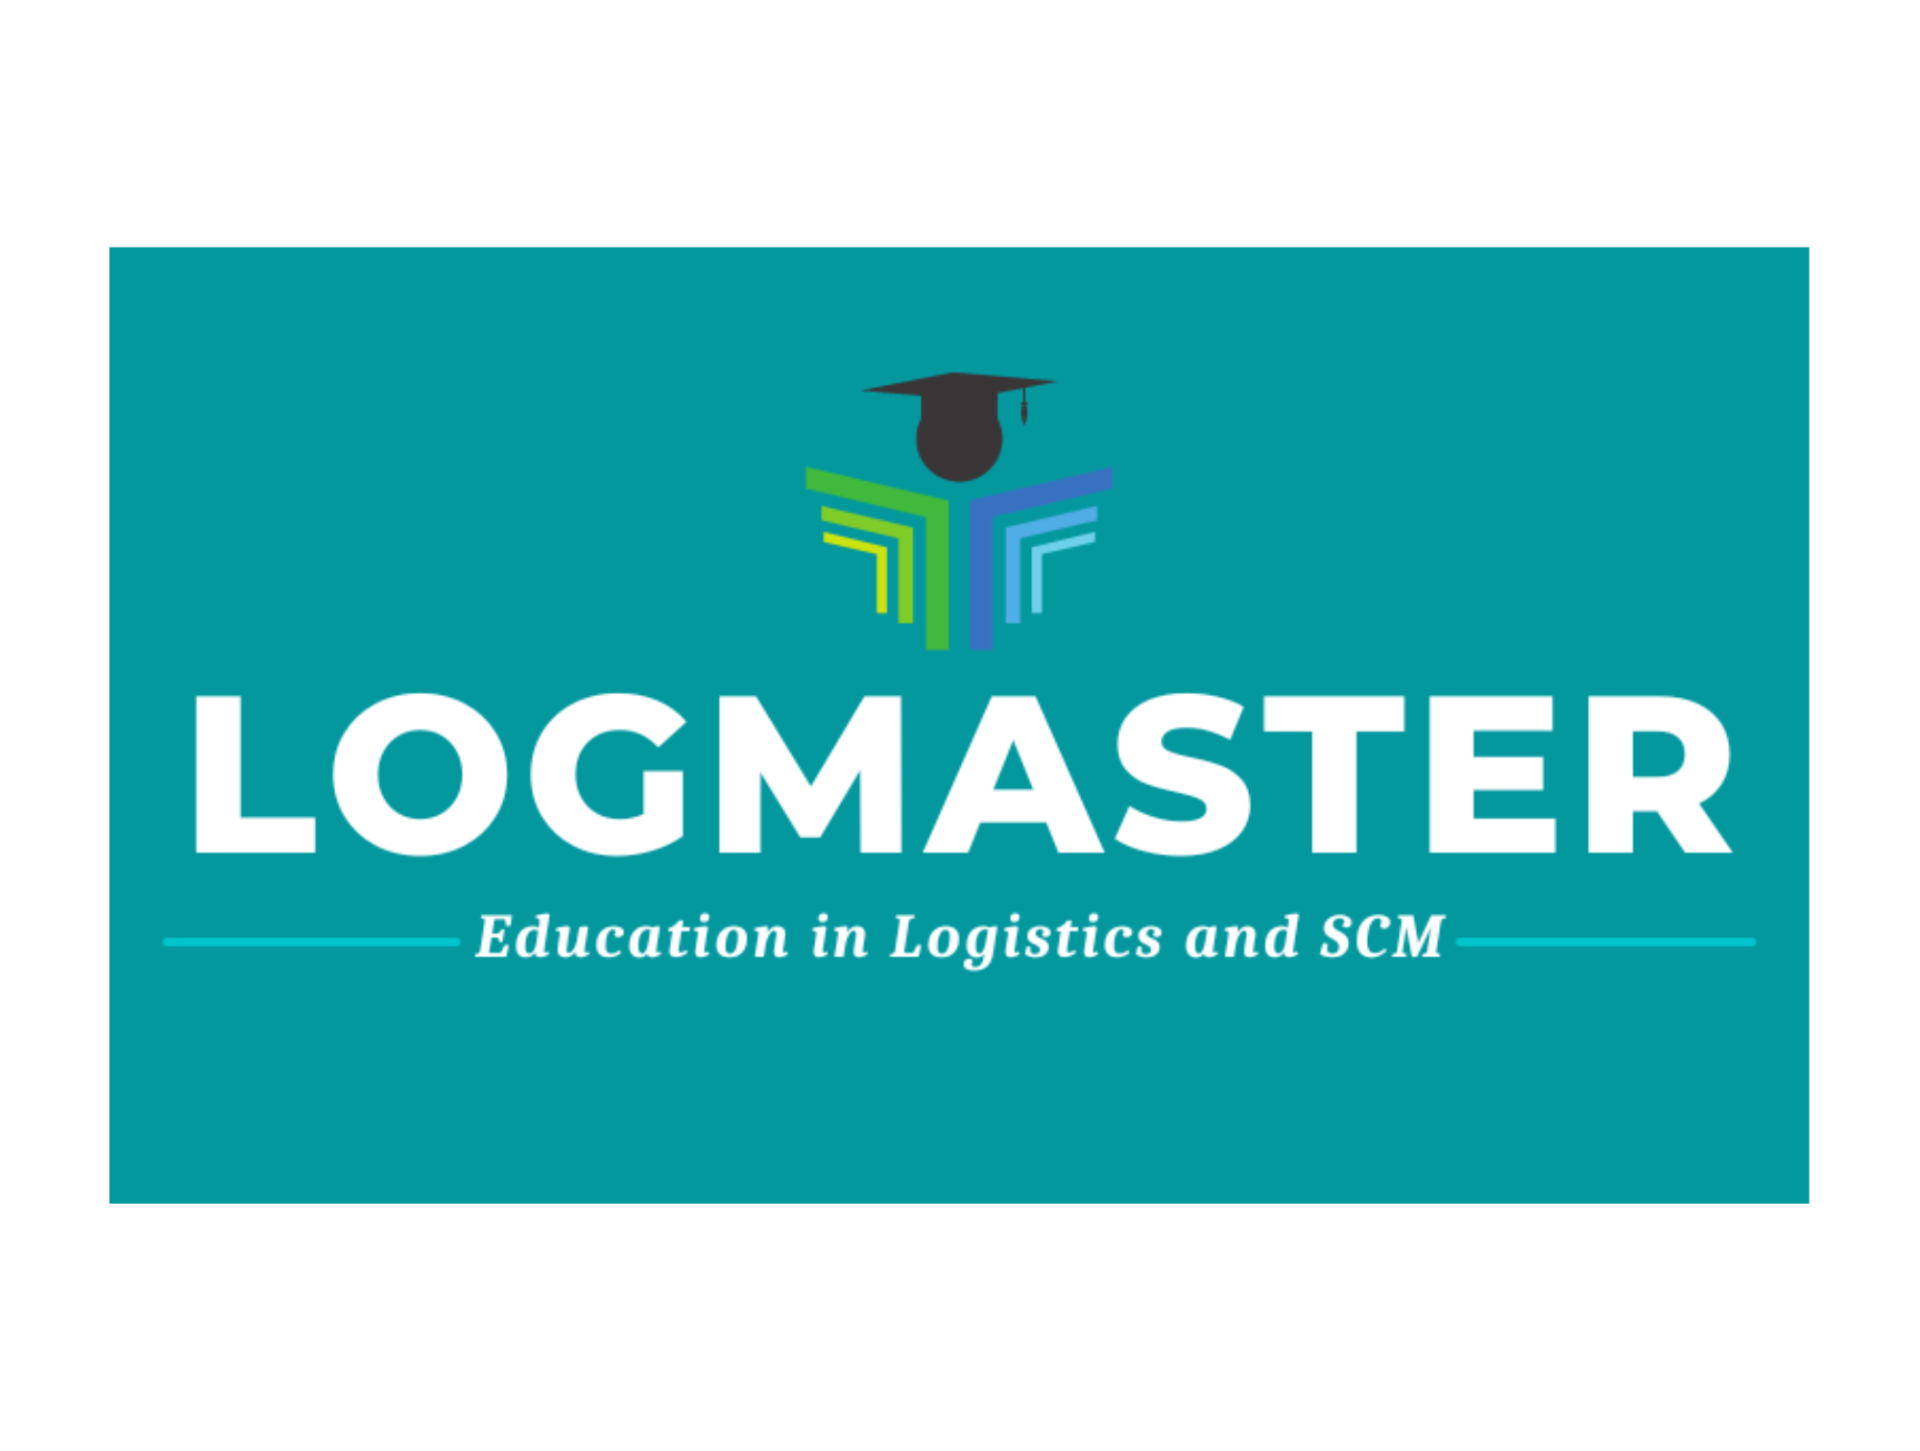 Logmaster project, co-financed by the European Union